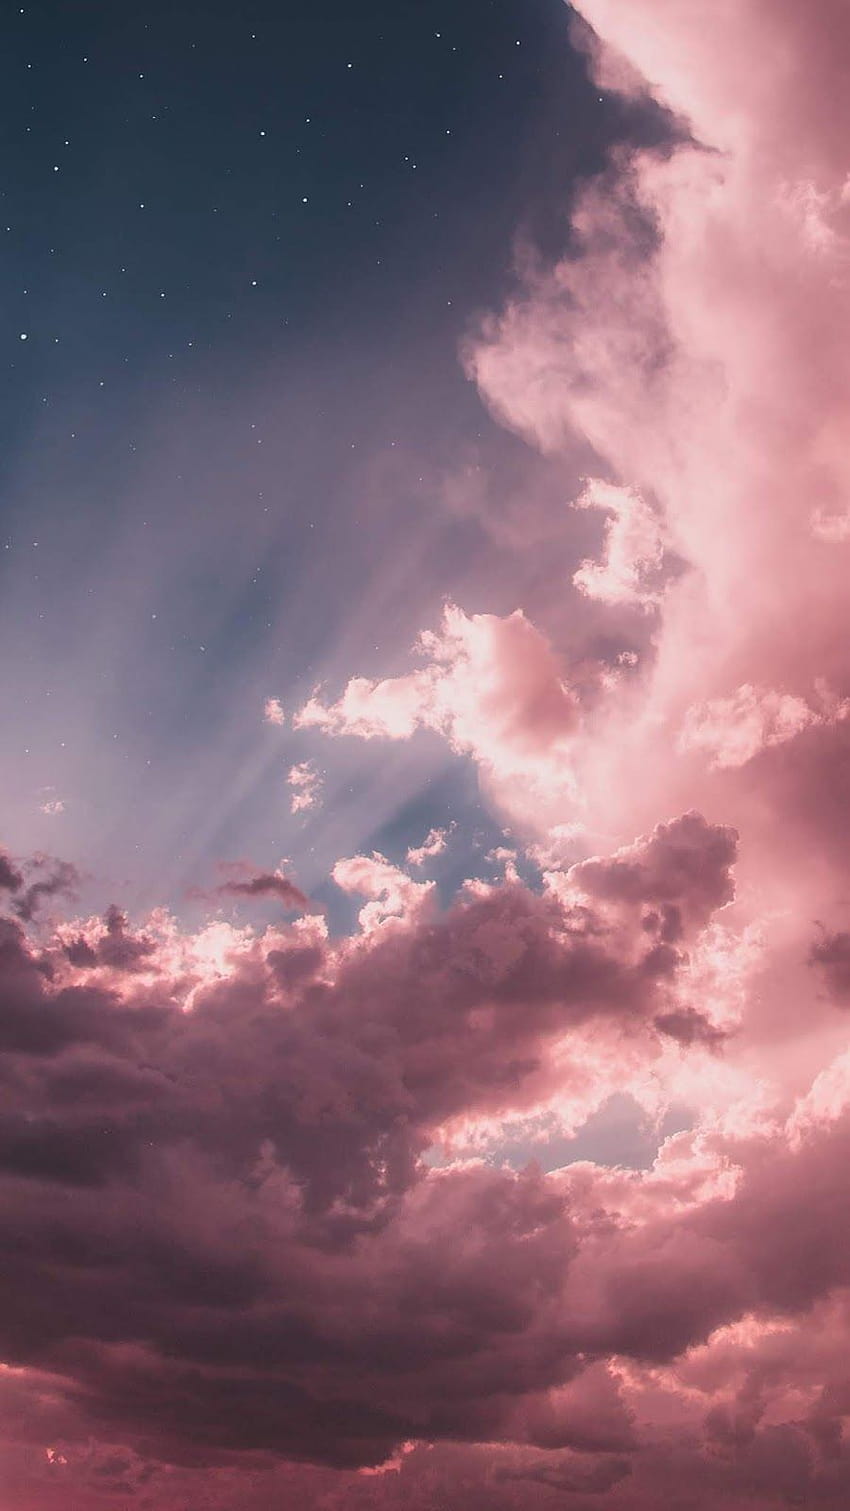 Aesthetic Pink Clouds and Backgrounds on PicGaGa, aesthetic glitter cloud HD phone wallpaper